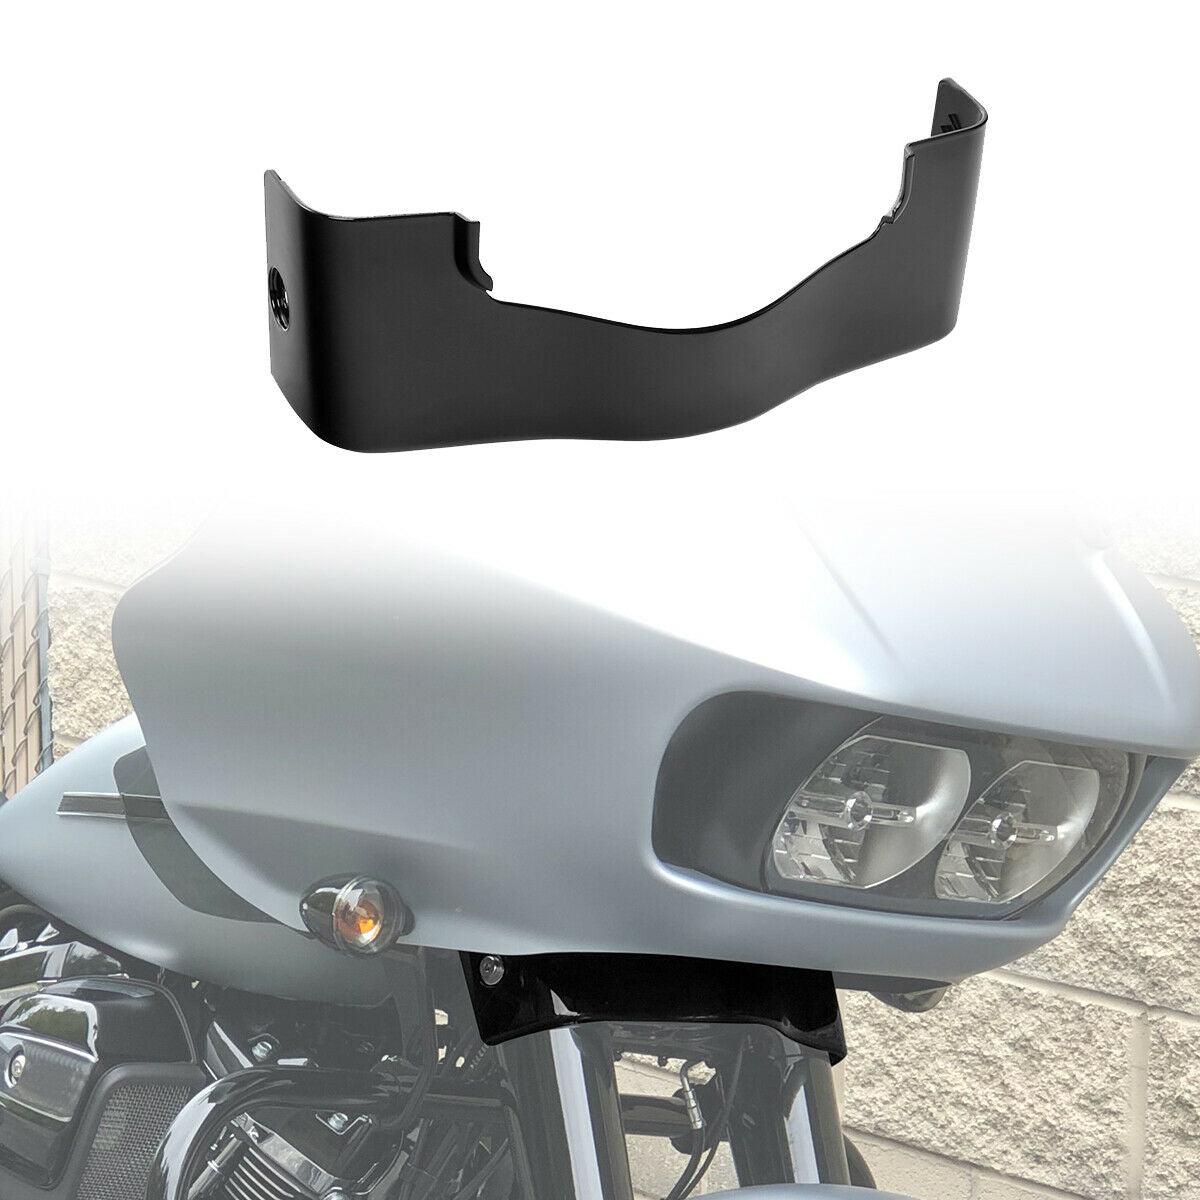 Black Outer Fairing Trim Skirt Fit For Harley Touring Road Glide 15-21 20 19 18 - Moto Life Products